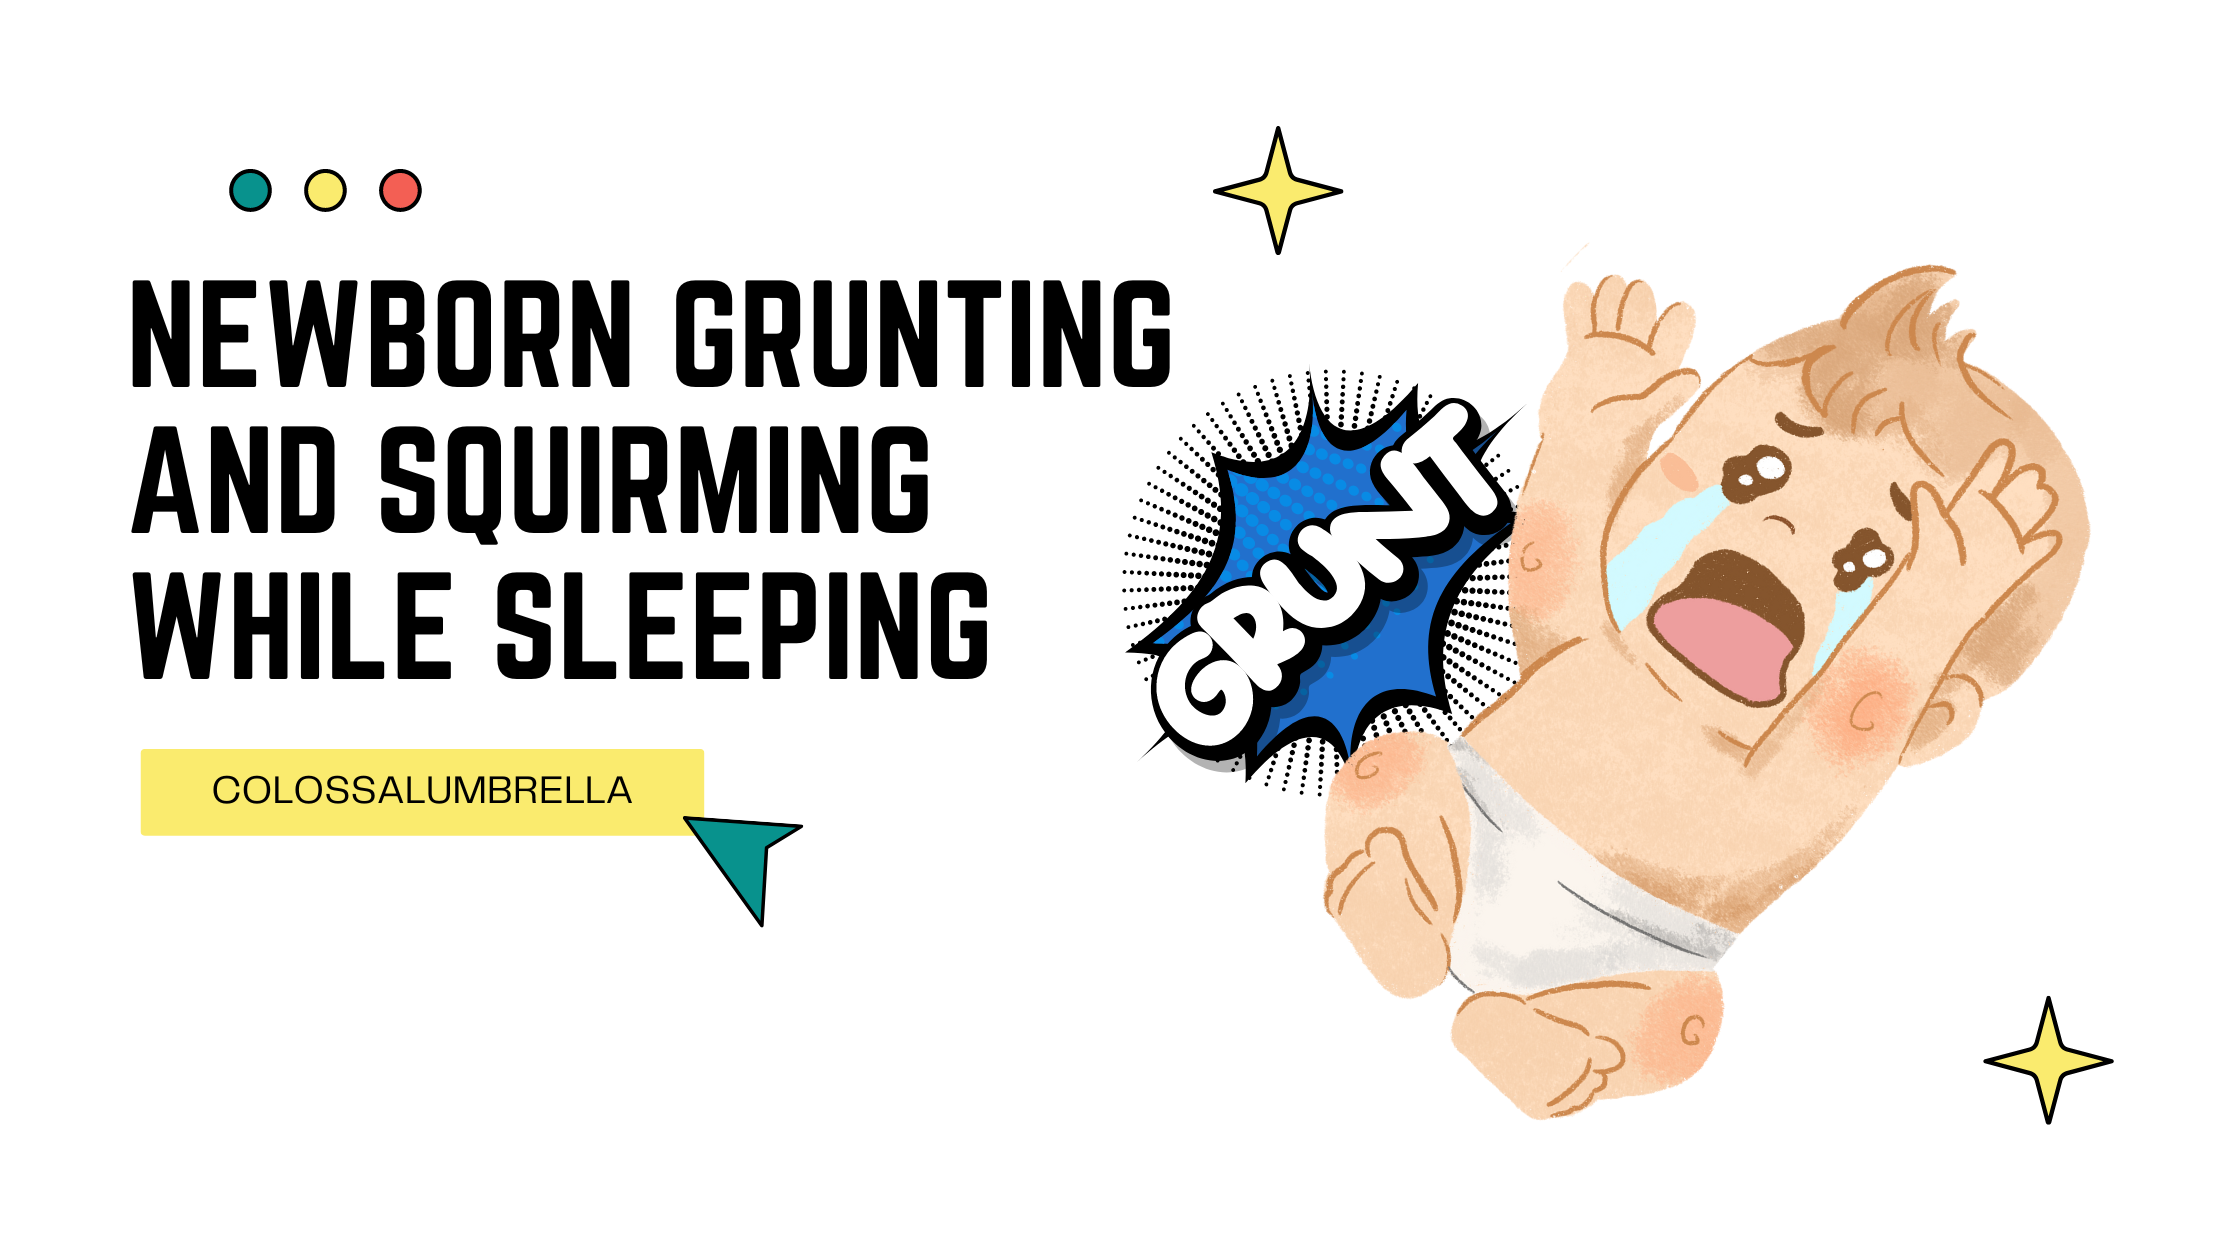 Newborn Grunting and Squirming While Sleeping